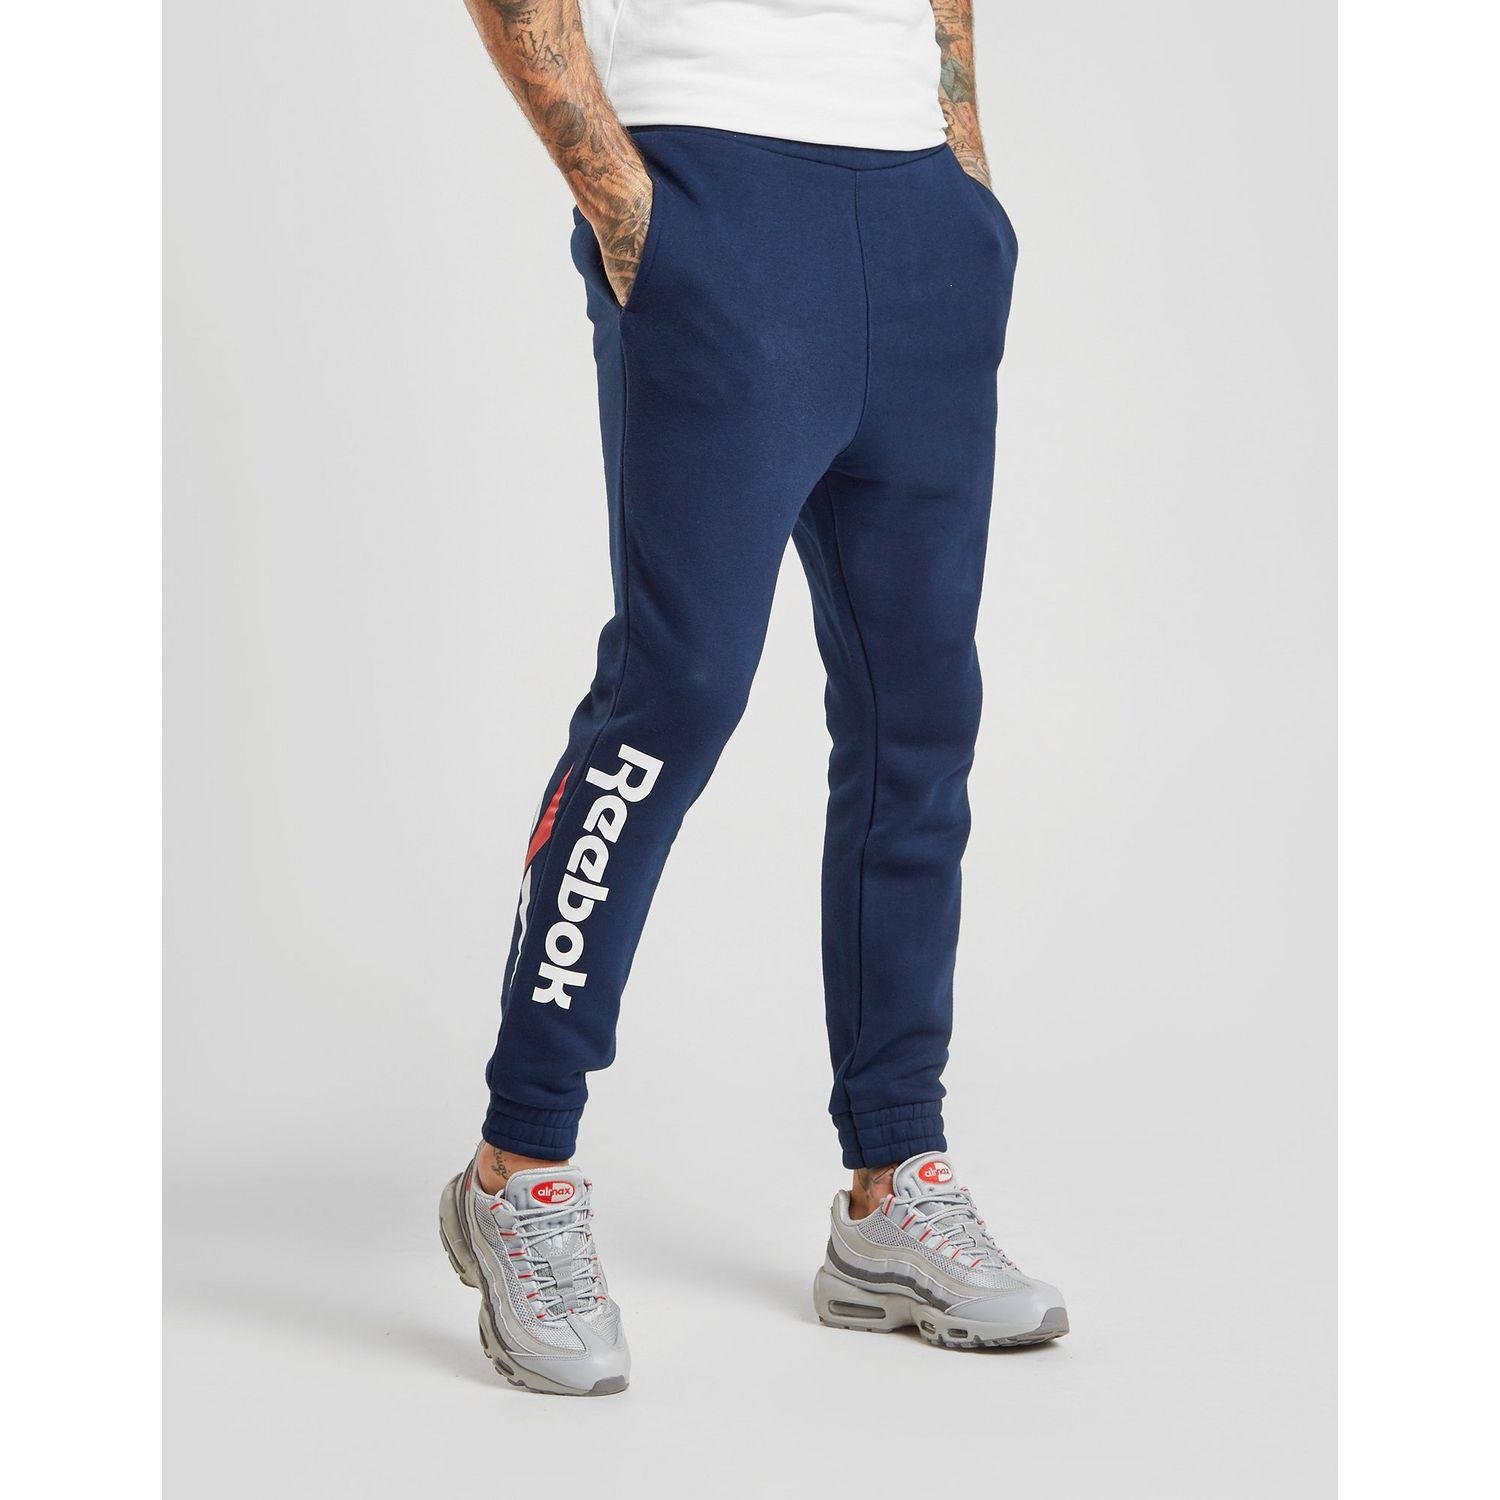 Reebok Classic Vector Track Pants in Blue for Men - Lyst